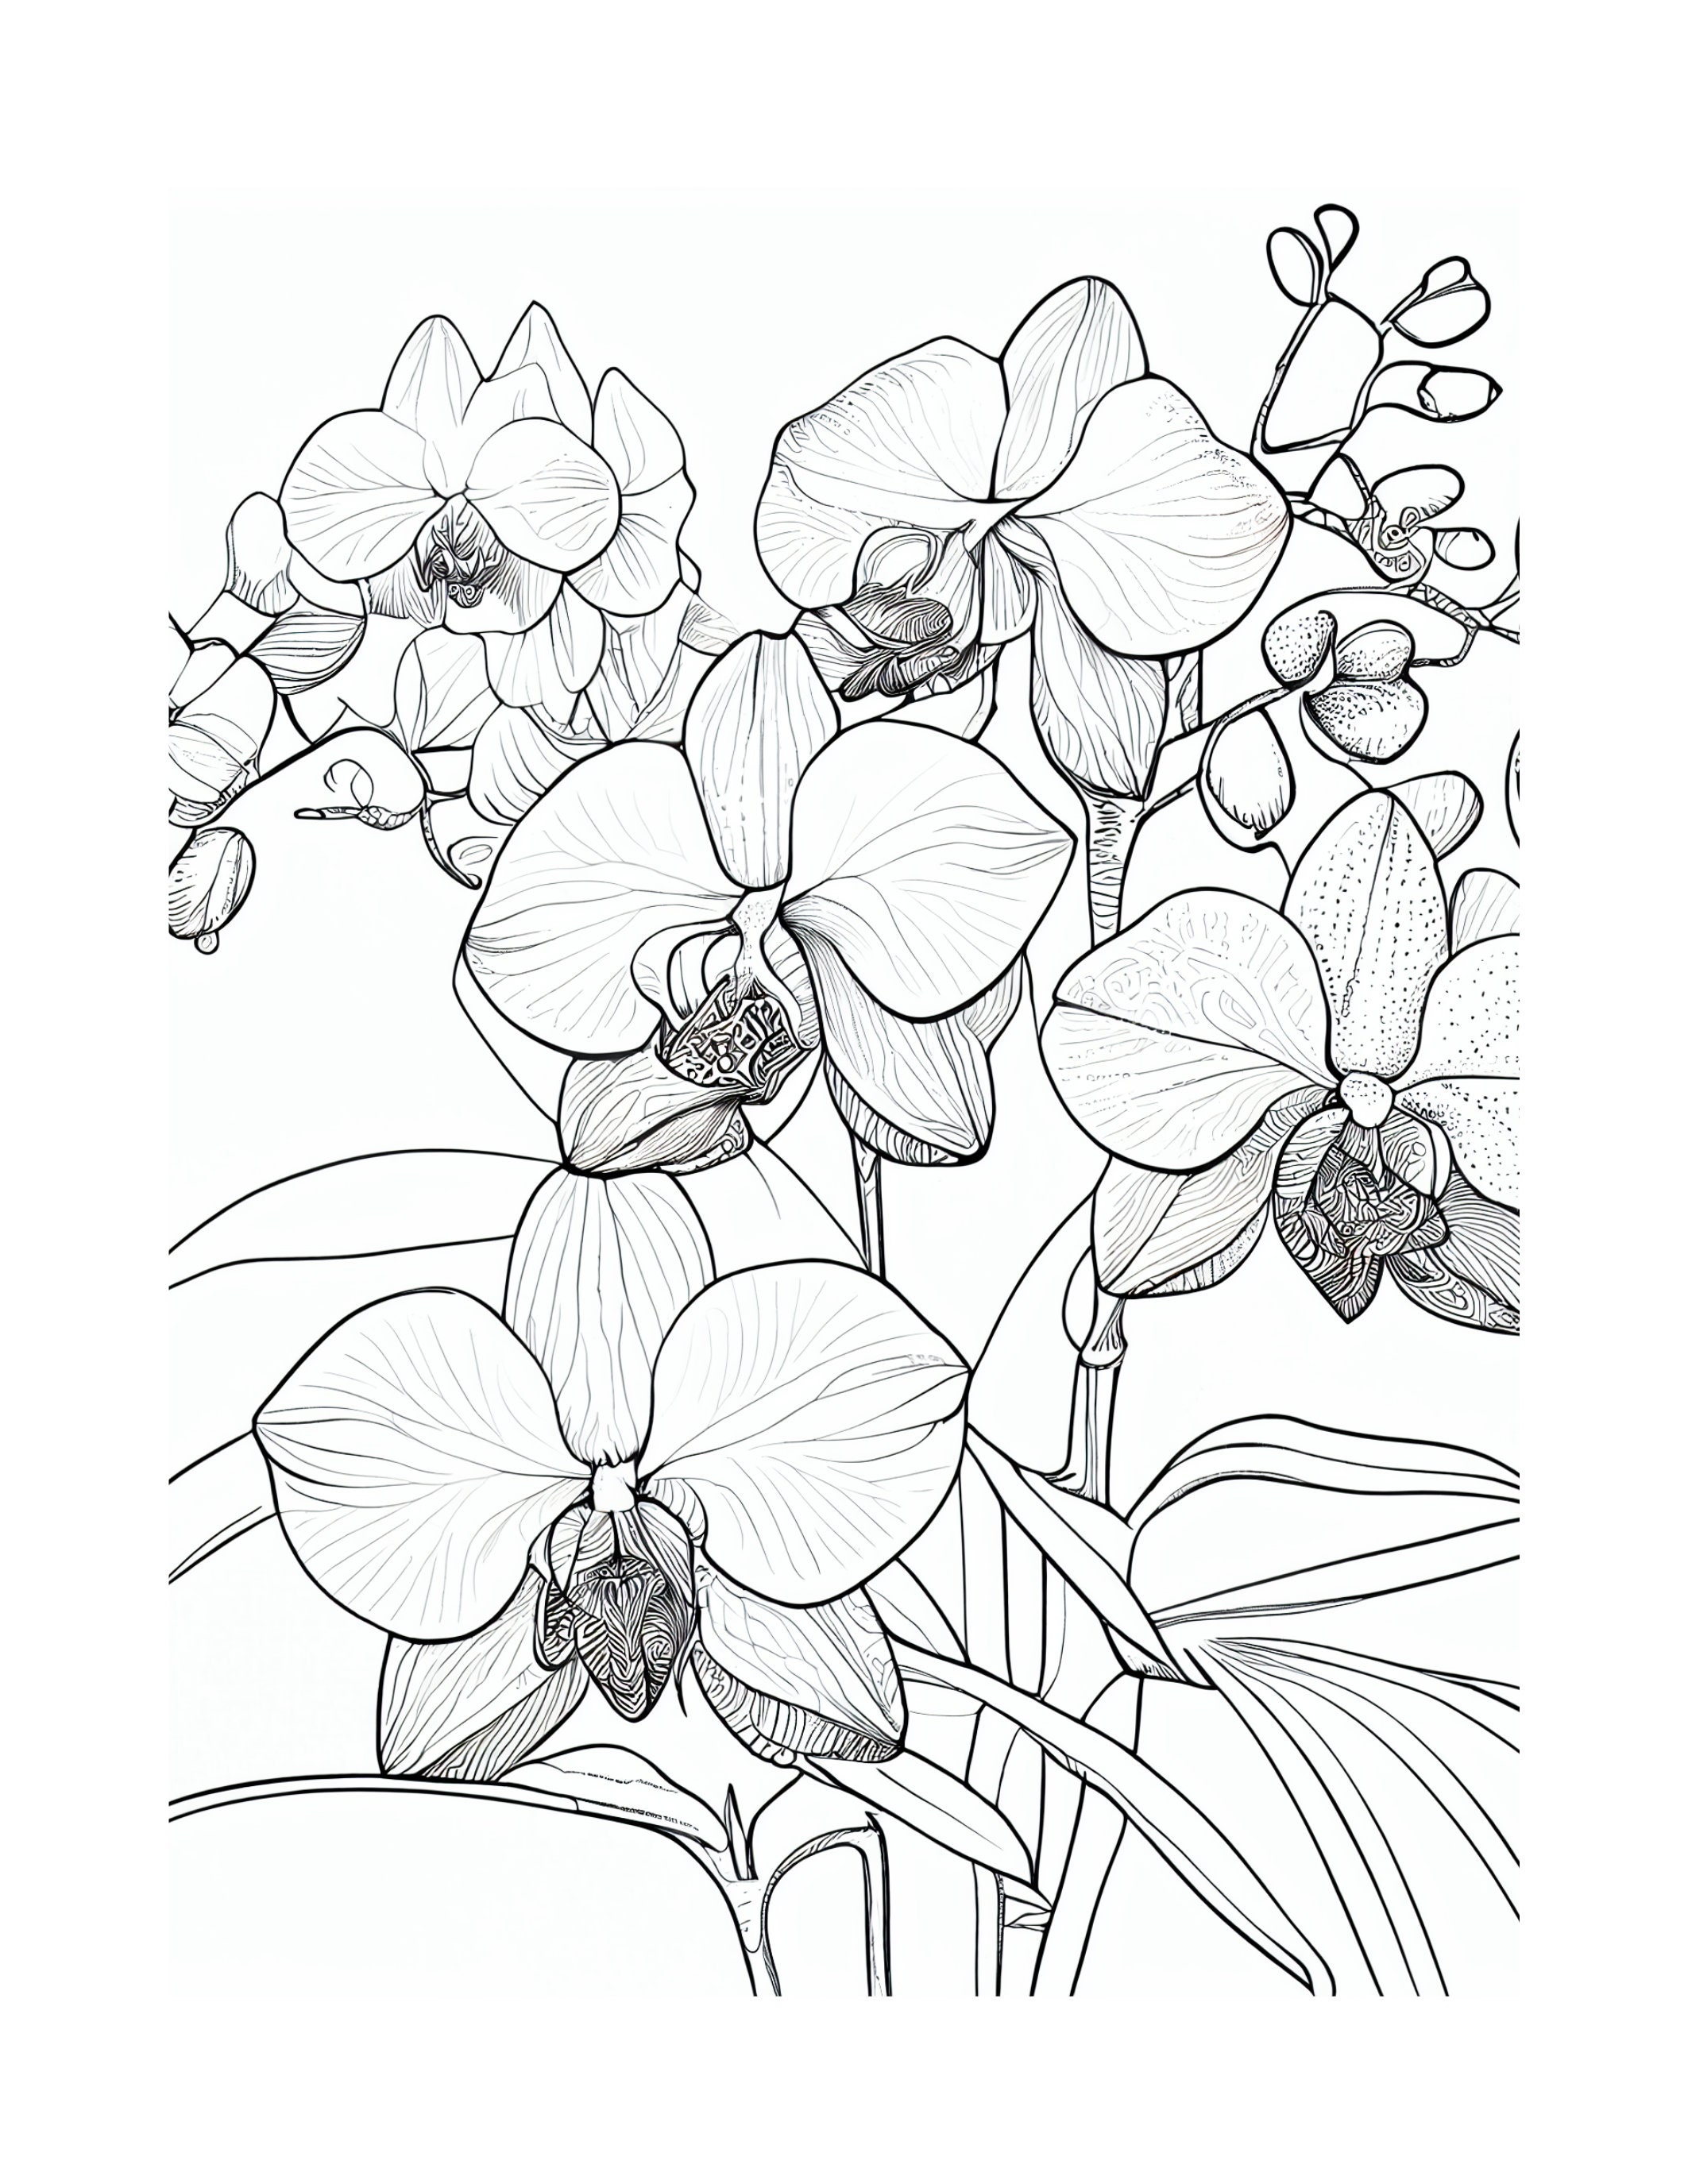 Amazing Night Flowers 2: Simply Satisfying Large Print Coloring Book For  Seniors and Adults With Black Pages and Amazing Flowers For Coloring: Adult Coloring  Book For Anxiety and Depression by Coloringship Studio